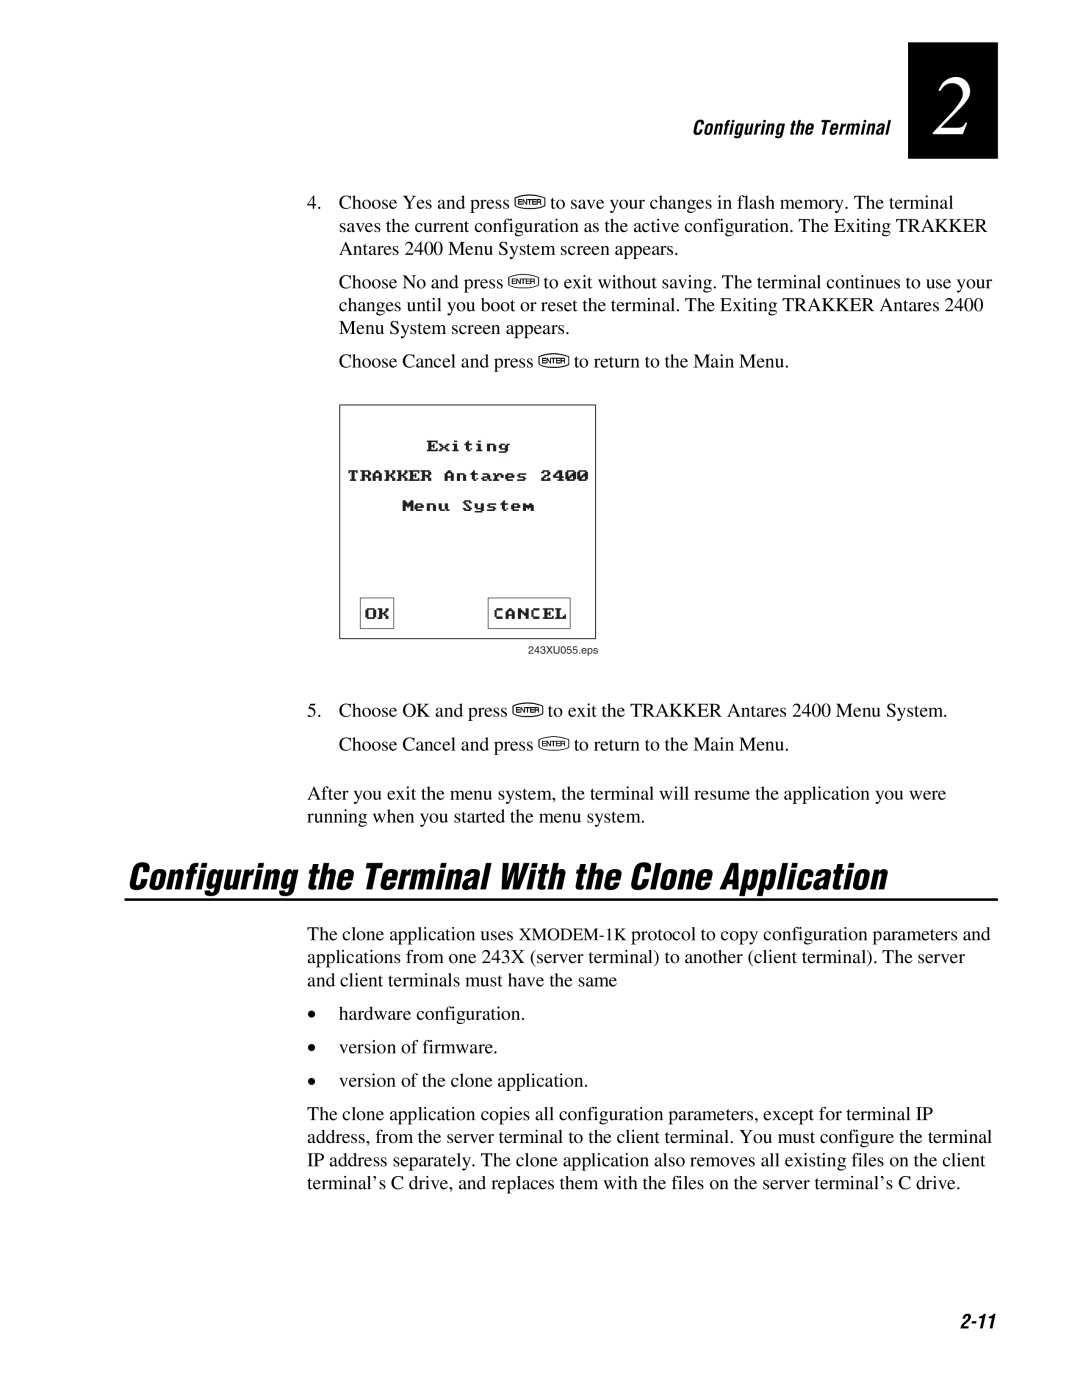 IBM 243X user manual Configuring the Terminal With the Clone Application, 2-11 